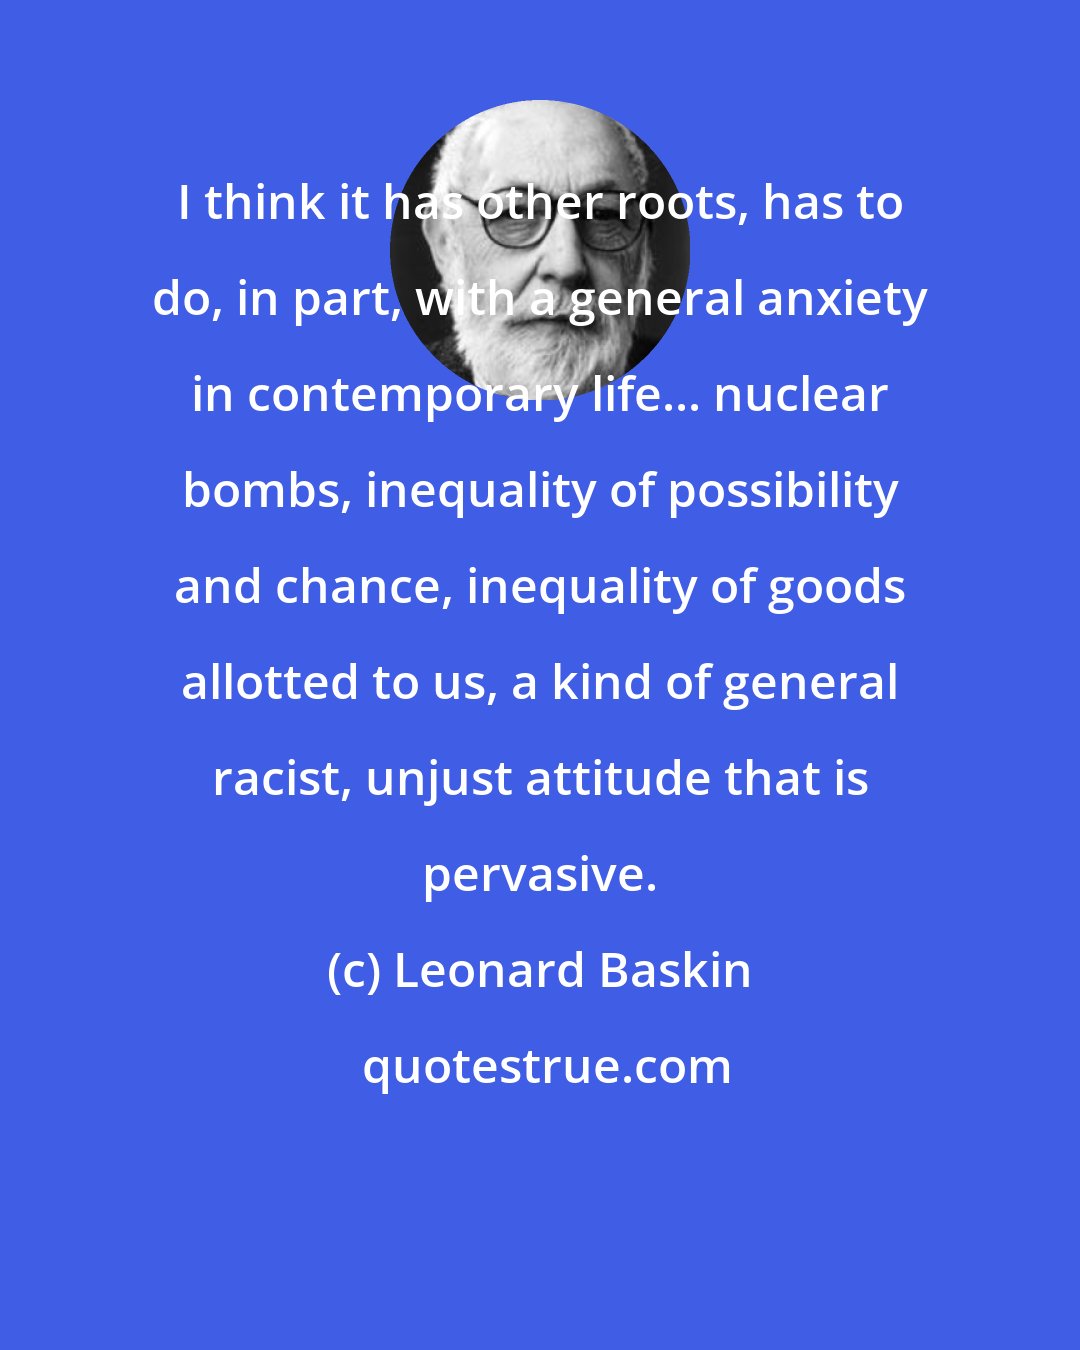 Leonard Baskin: I think it has other roots, has to do, in part, with a general anxiety in contemporary life... nuclear bombs, inequality of possibility and chance, inequality of goods allotted to us, a kind of general racist, unjust attitude that is pervasive.